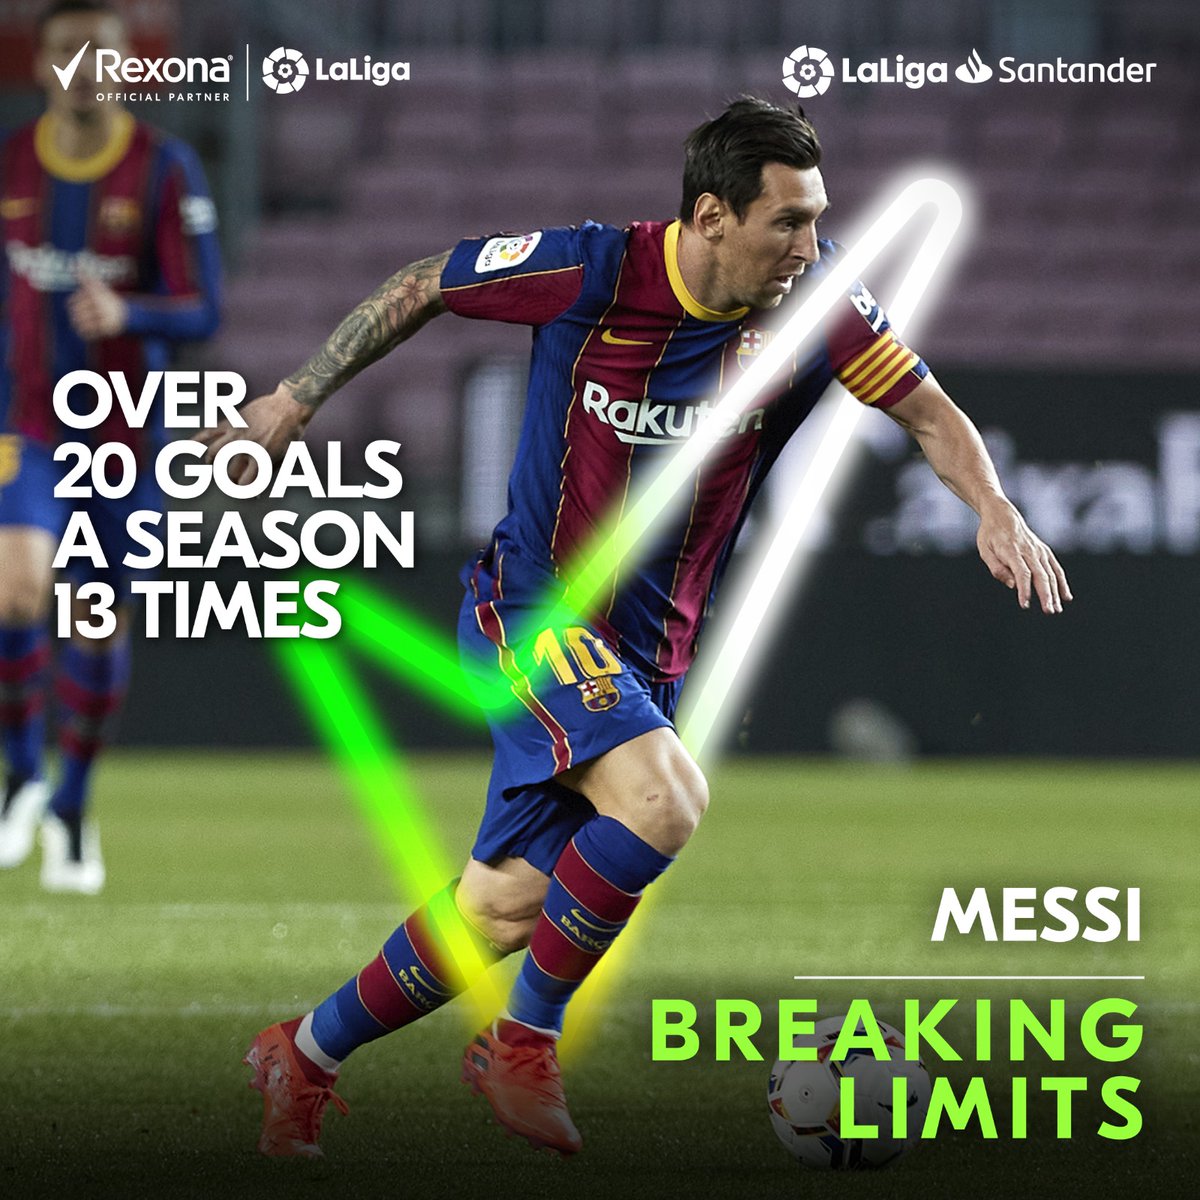 🌟 NO LIMITS! 🌟

Messi has now scored over 20 goals in #LaLigaSantander for the 13th season in a row! 🔝⚽️

#BreakingLimits
#MoveYourWay
#Rexona